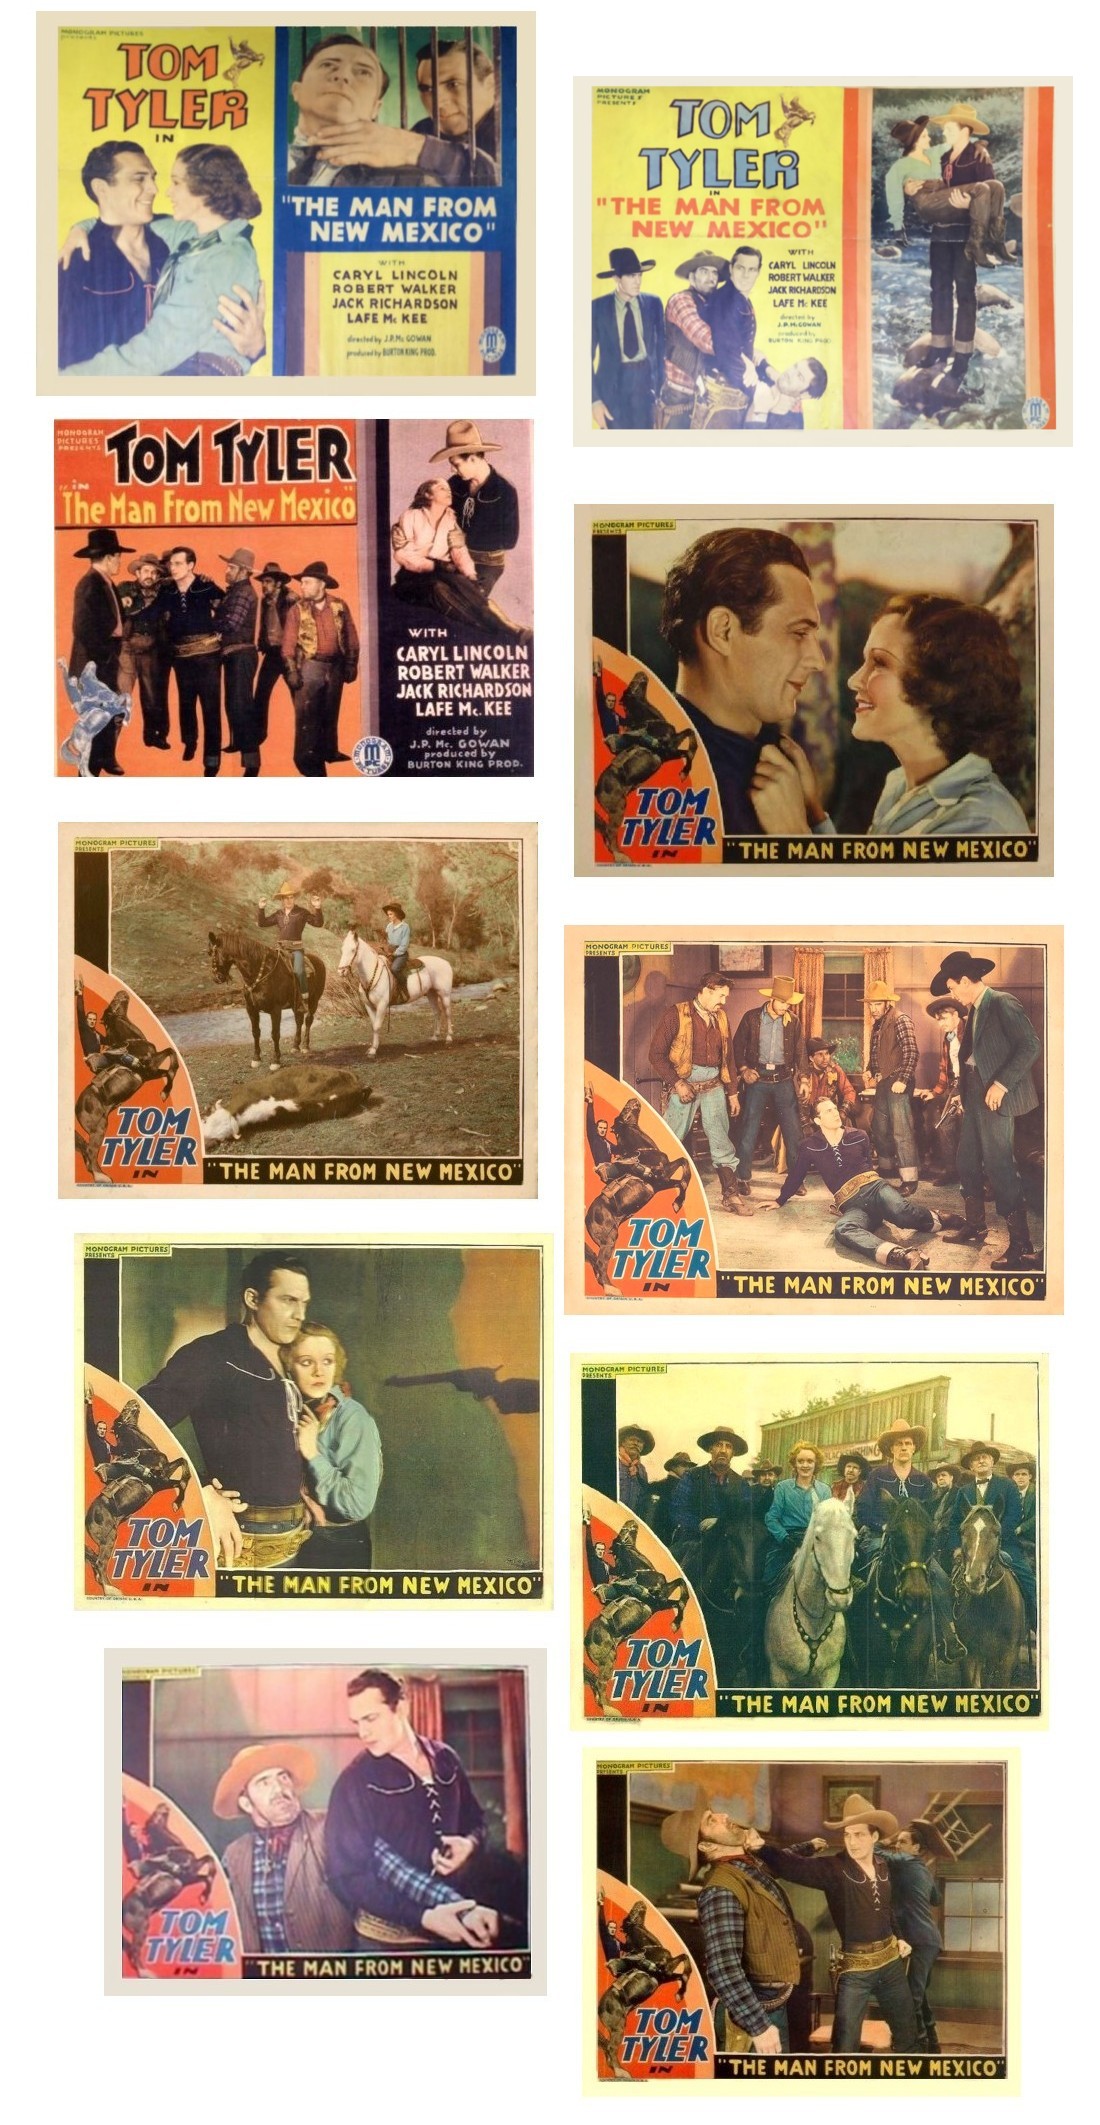 The Man from New Mexico lobby cards